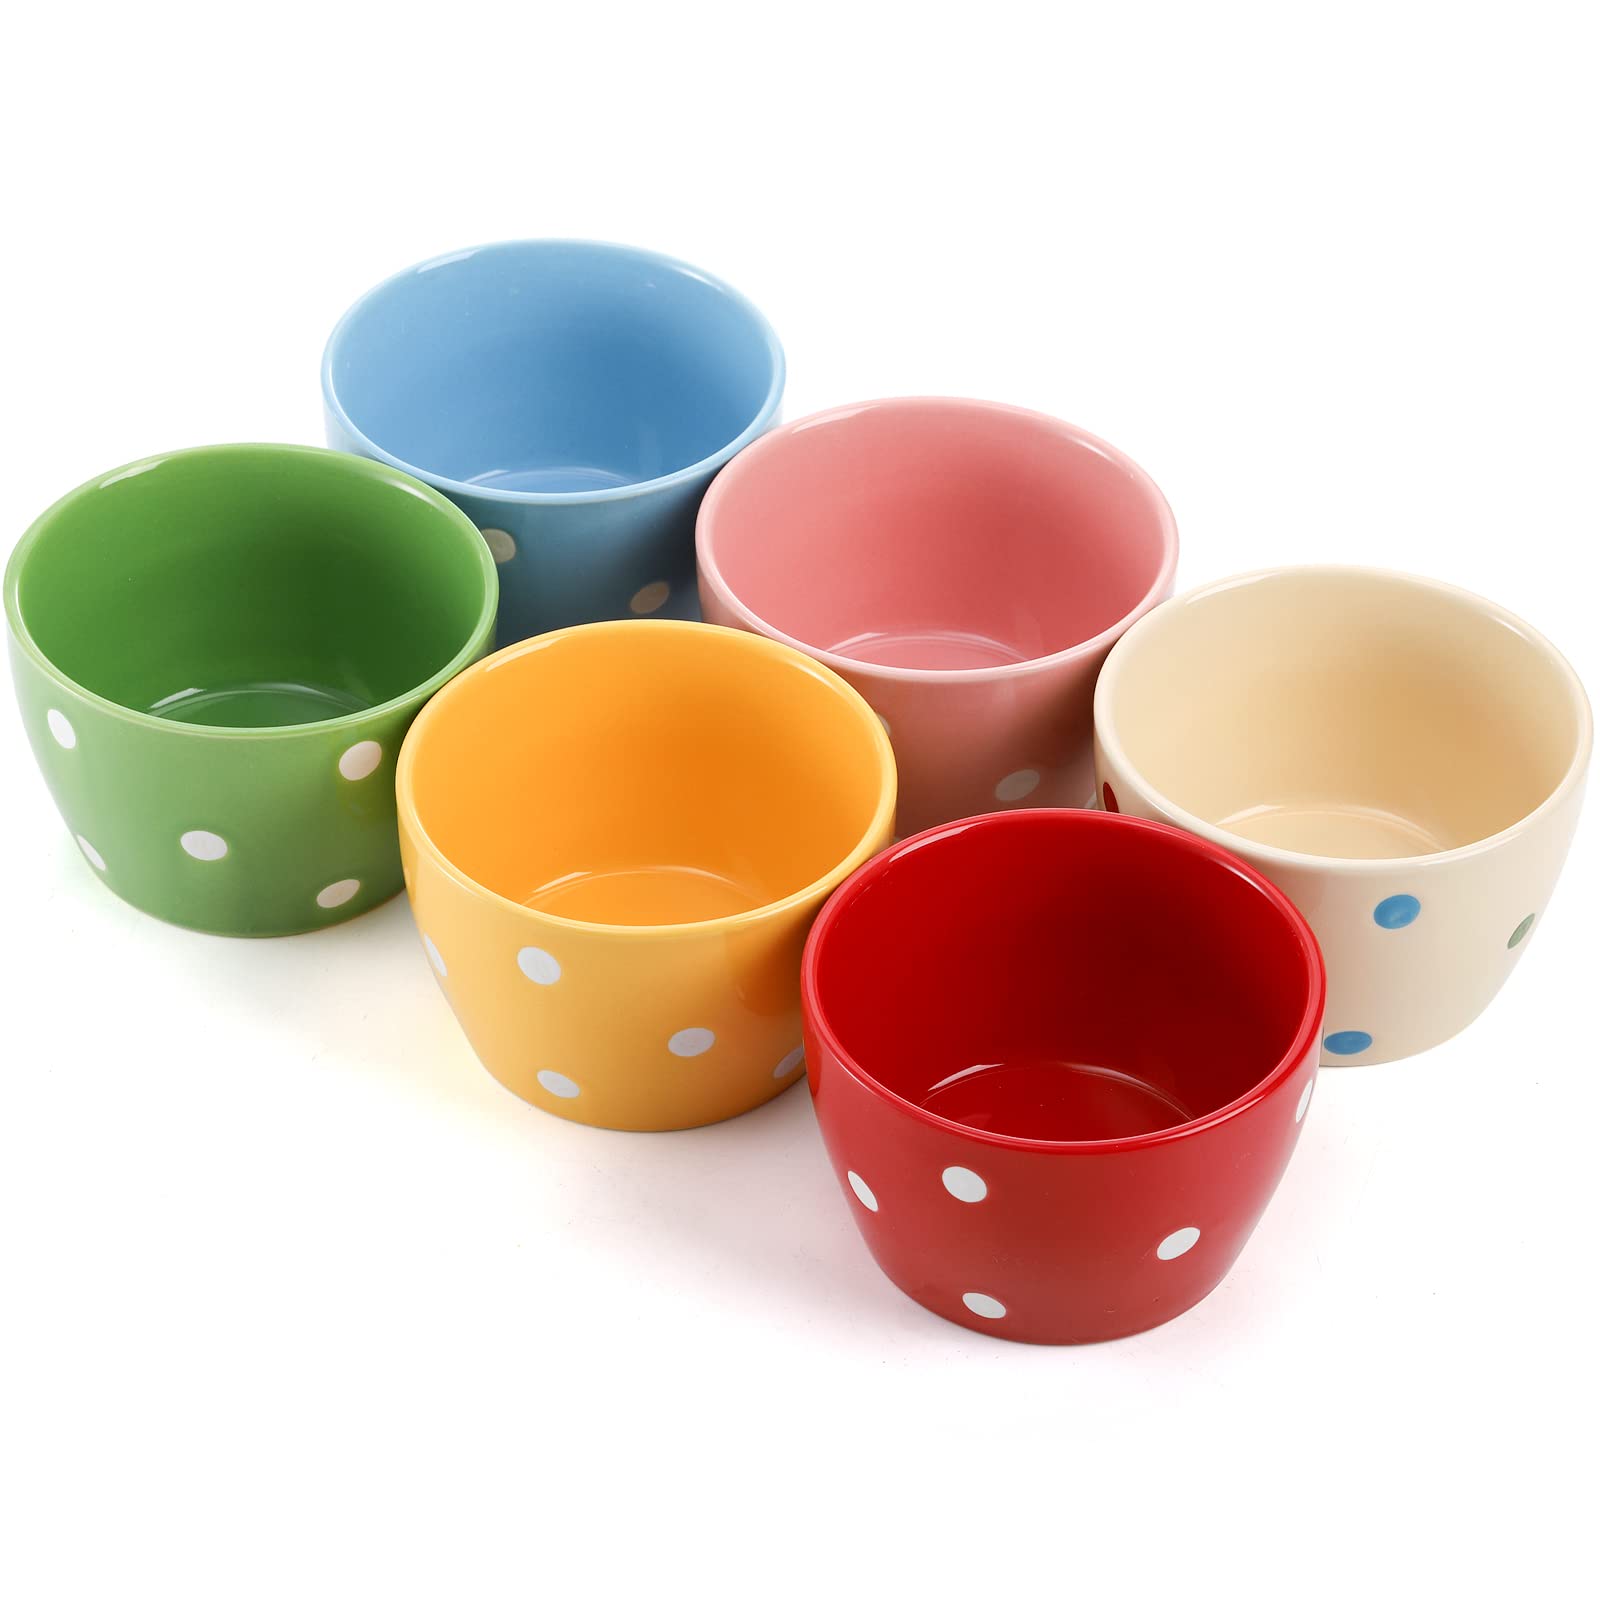 Cedilis 12 Pack Small Porcelain Bowls, 10oz Dessert Bowls, Colorful Ceramic Prep Bowls, Serving Bowl for Side Dishes, Dipping, Snack, Appetizer, Ice Cream, Condiments, Soup, Rice, Microwave Safe